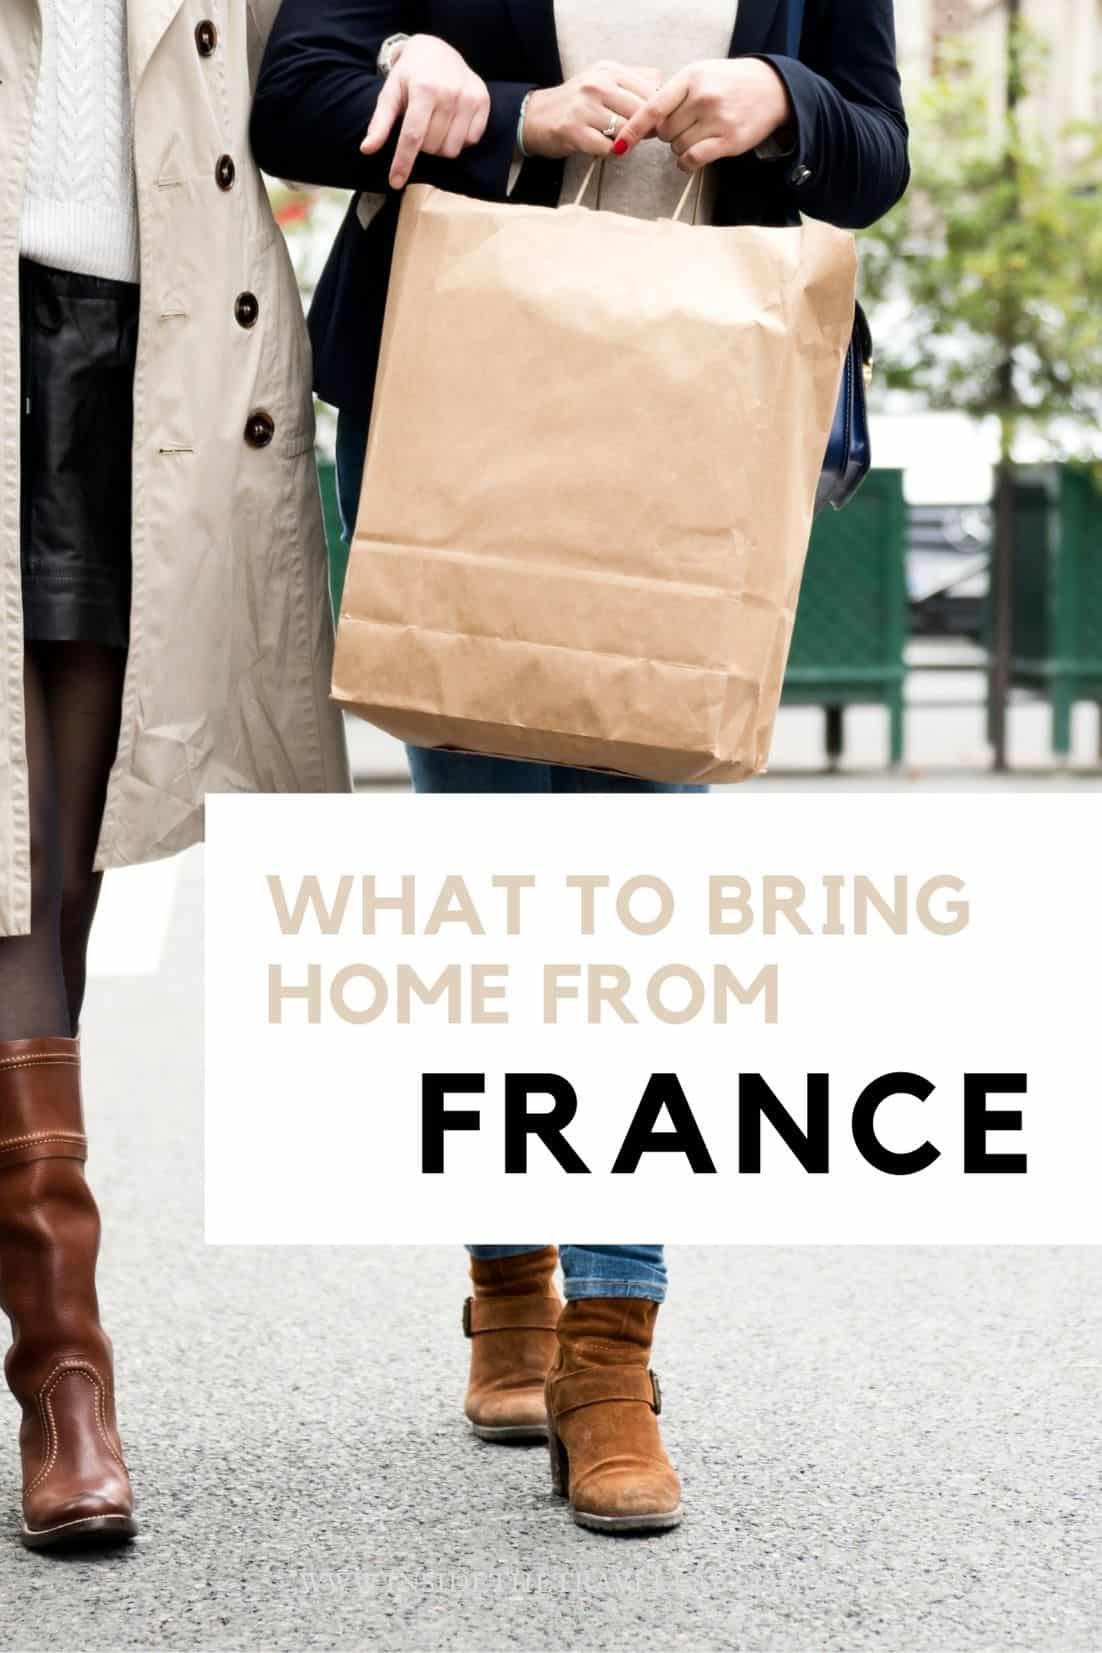 What to bring home from France